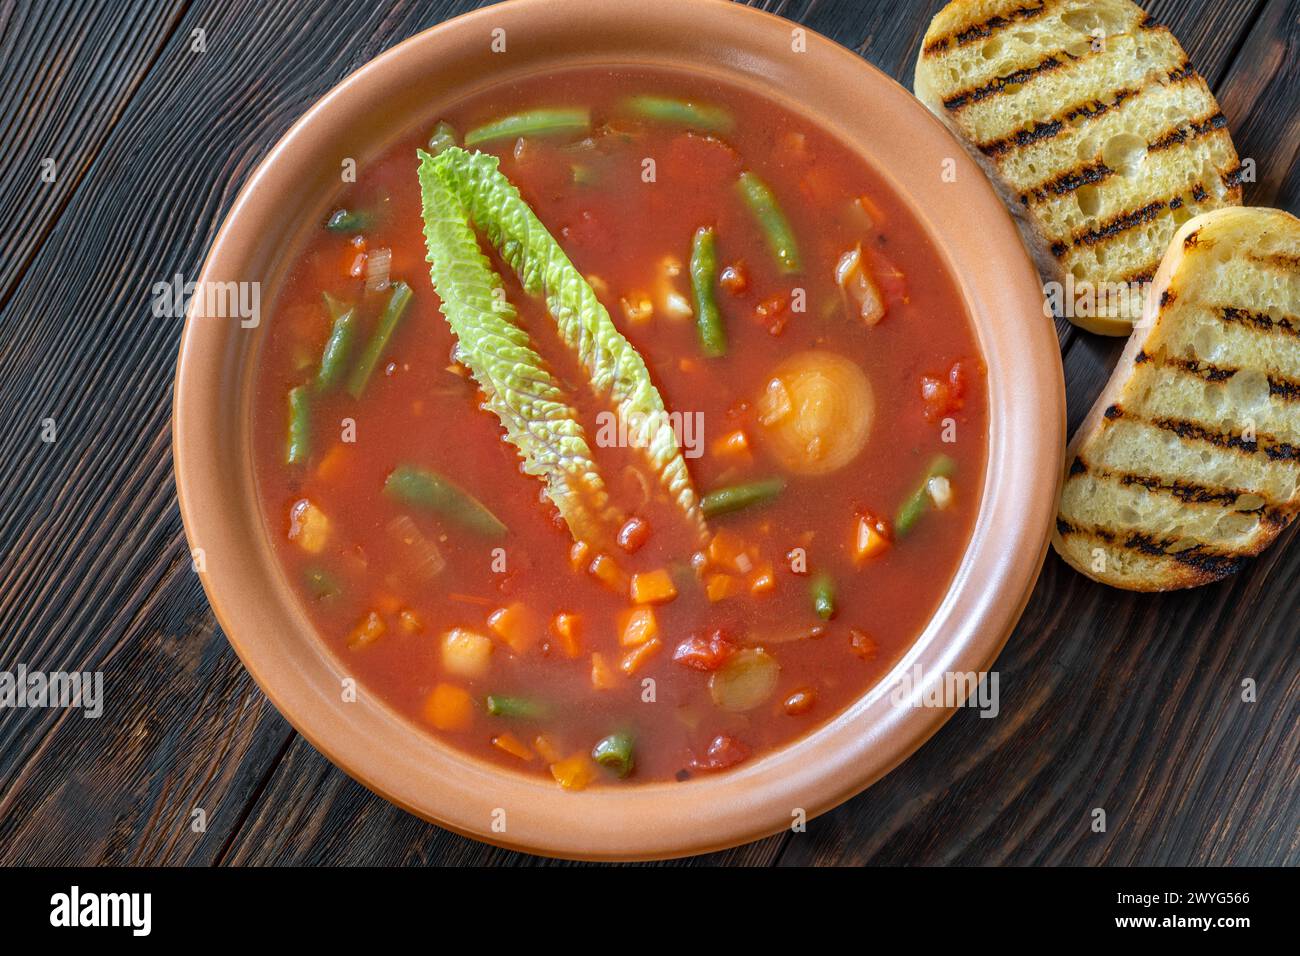 Portion of Minestrone soup made with vegetables and stock Stock Photo